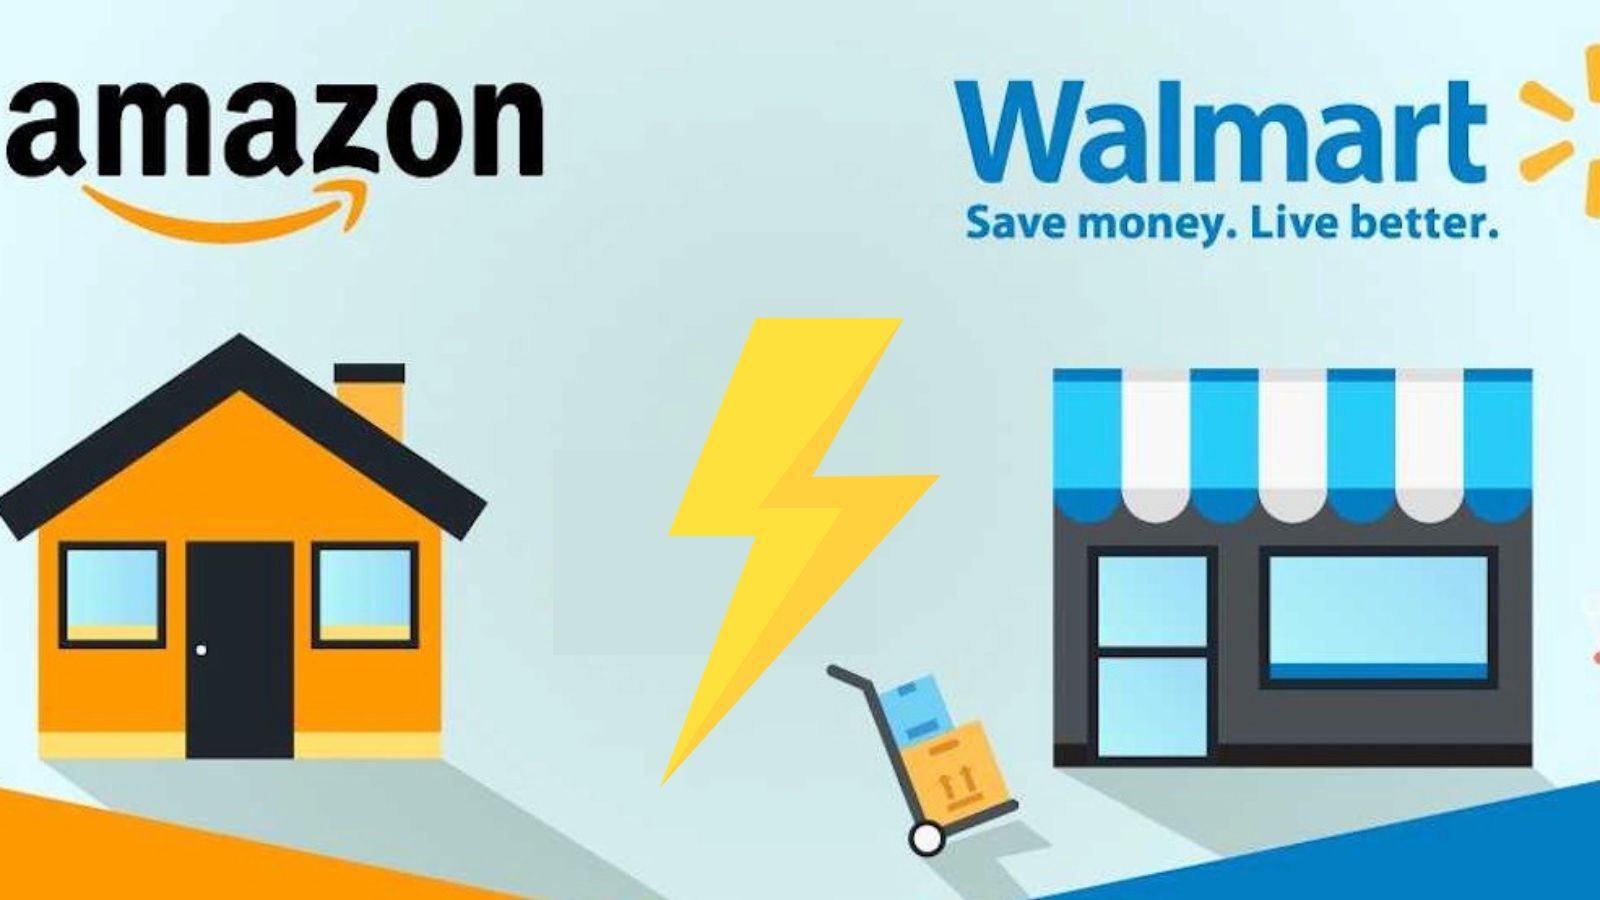 Does Amazon Own Walmart? (The Relationship Between Them)